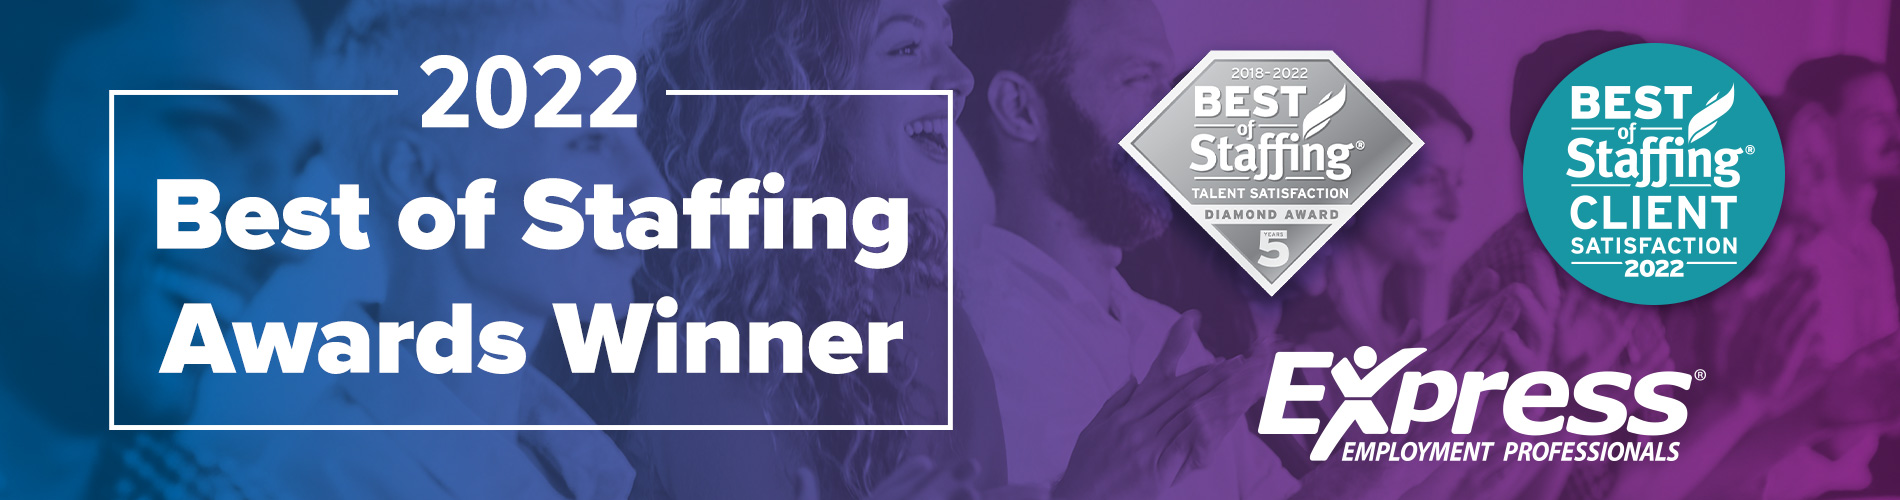 Best of Staffing 2022 Home Page Banner 1900x500